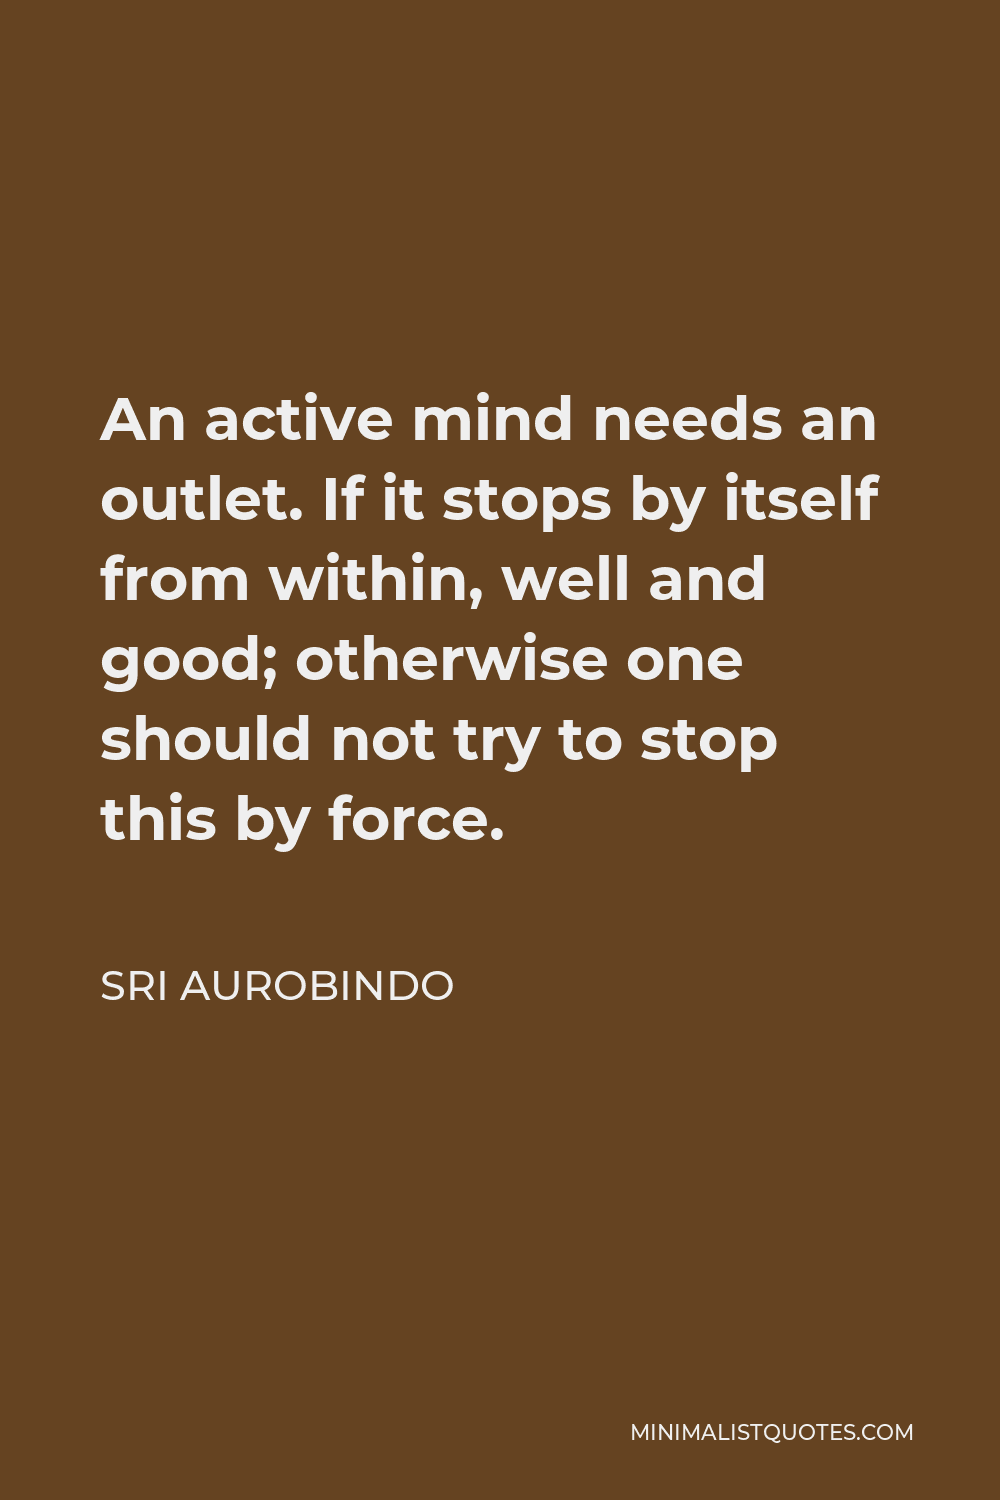 Sri Aurobindo Quote - An active mind needs an outlet. If it stops by itself from within, well and good; otherwise one should not try to stop this by force.